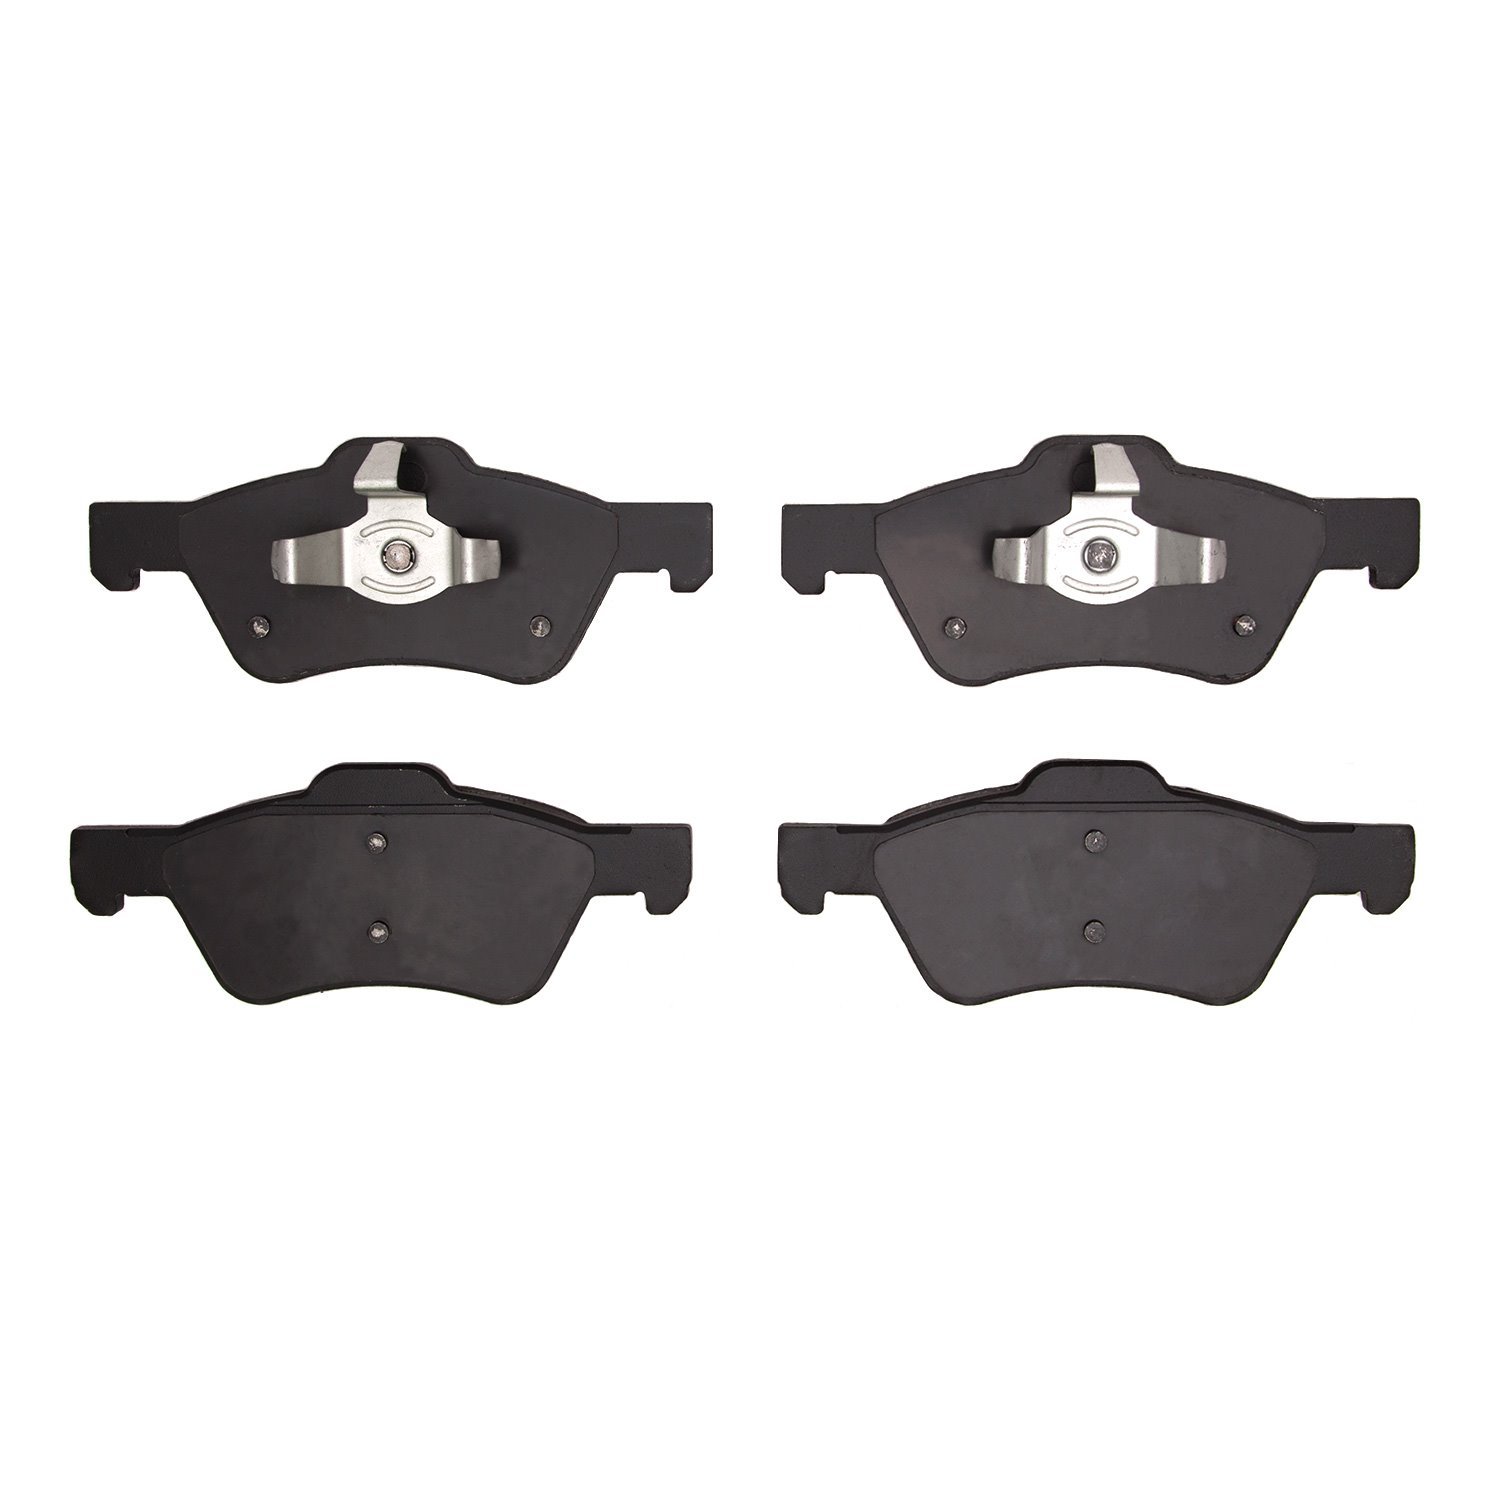 1310-1047-10 3000-Series Ceramic Brake Pads, 2008-2012 Ford/Lincoln/Mercury/Mazda, Position: Front